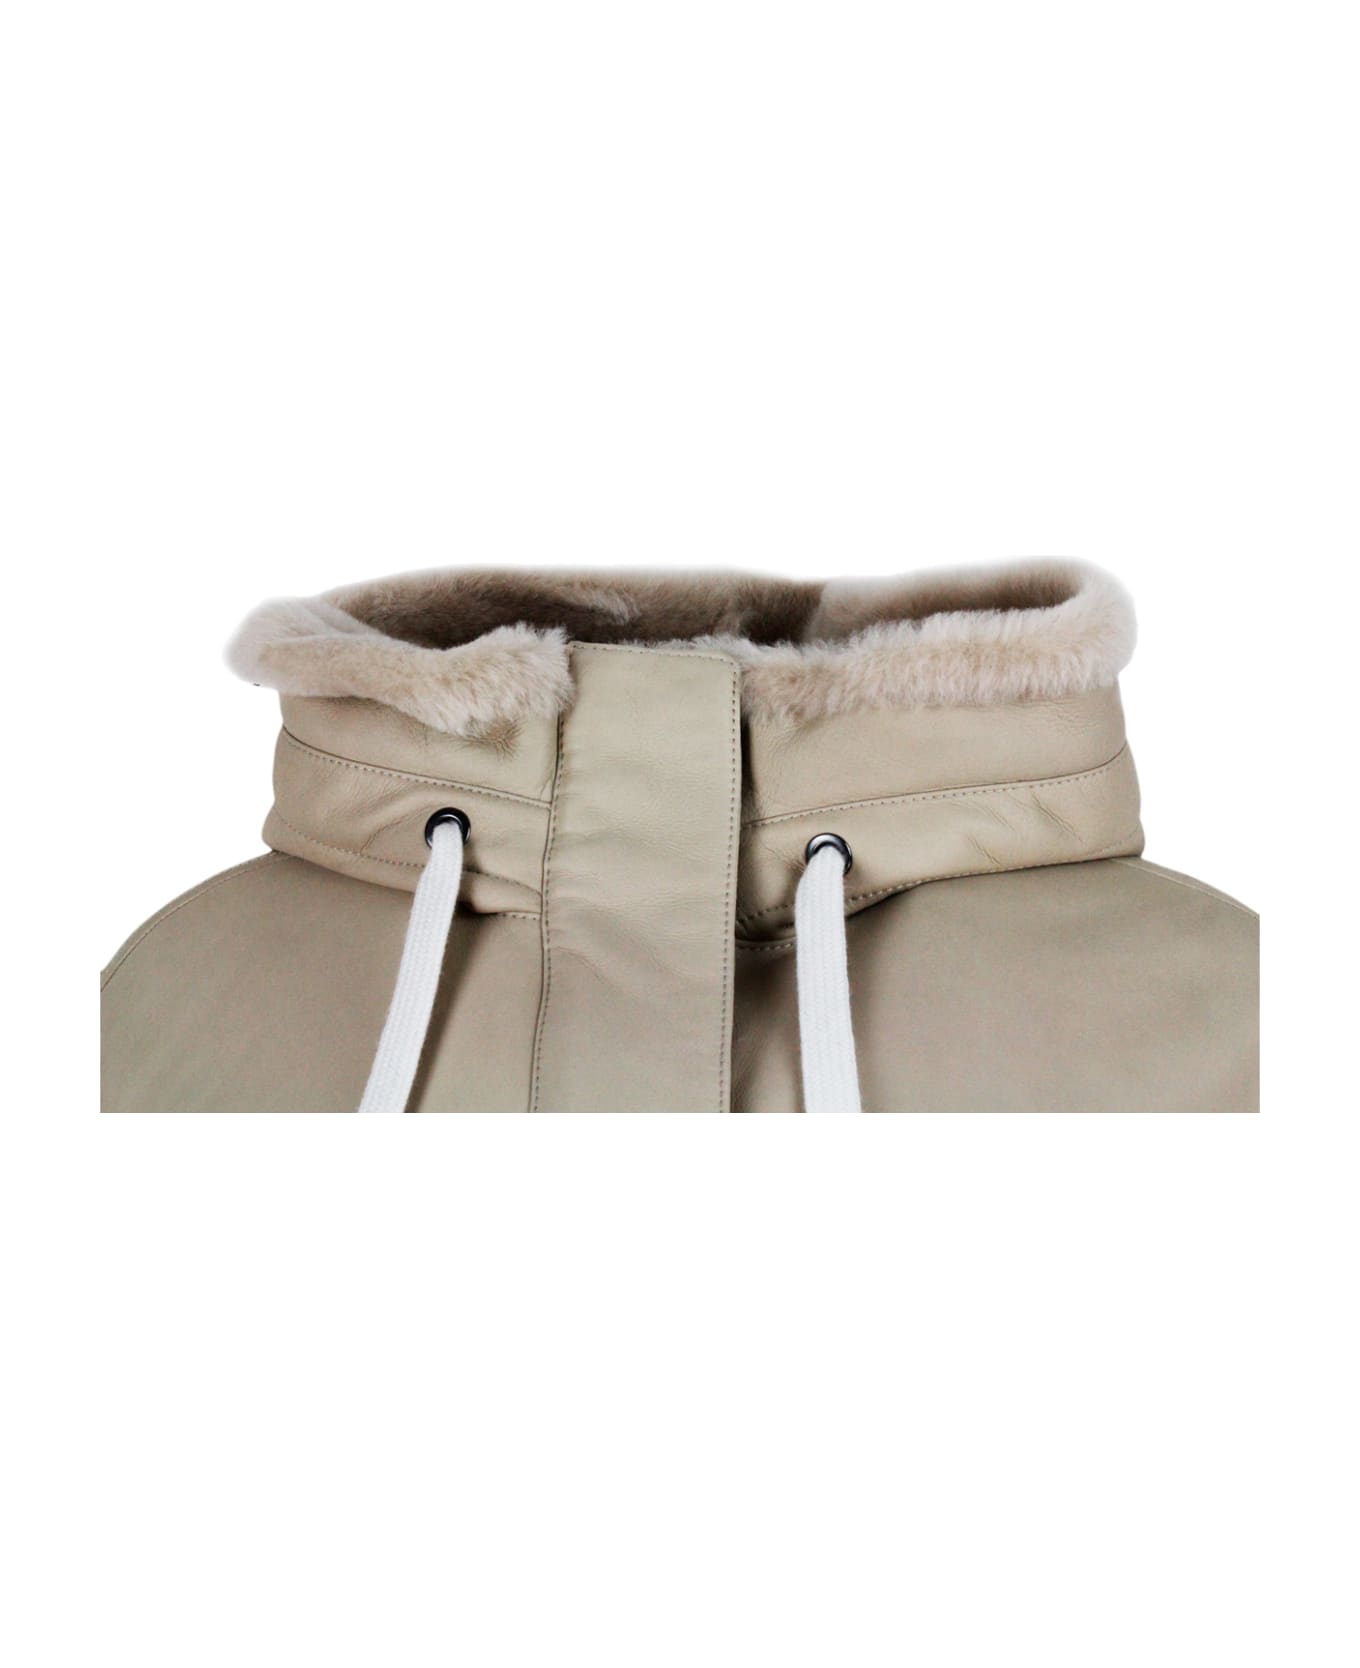 Brunello Cucinelli Soft Shearling Jacket With Hood - Beige